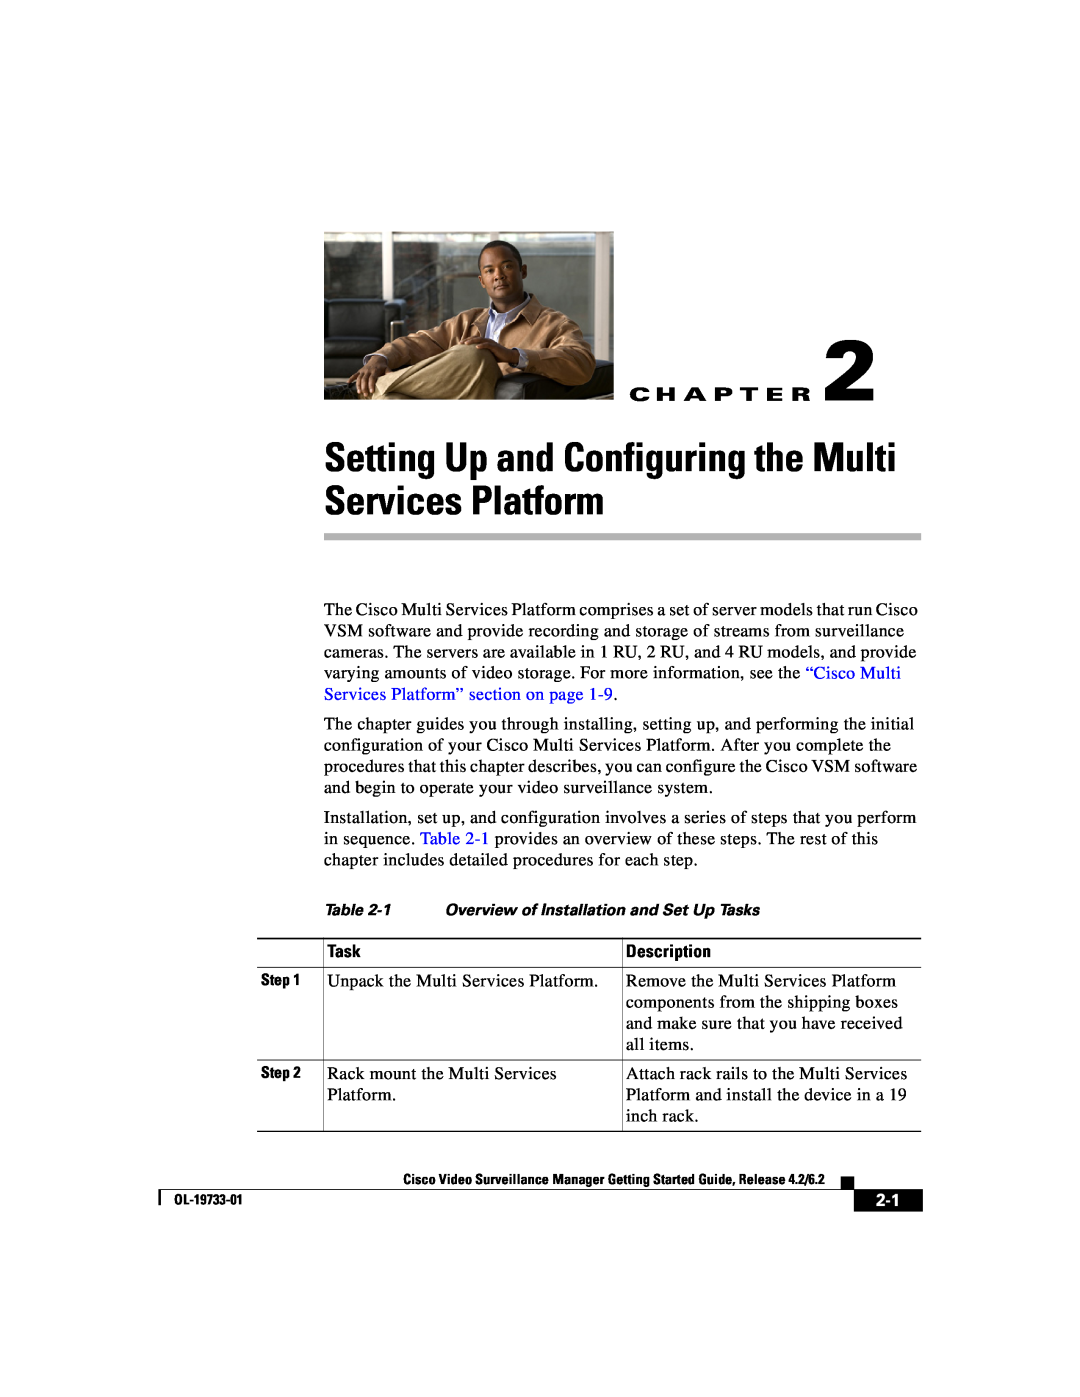 Cisco Systems Release 4.2 manual Services Platform, Setting Up and Configuring the Multi, C H A P T E R, Task, Description 